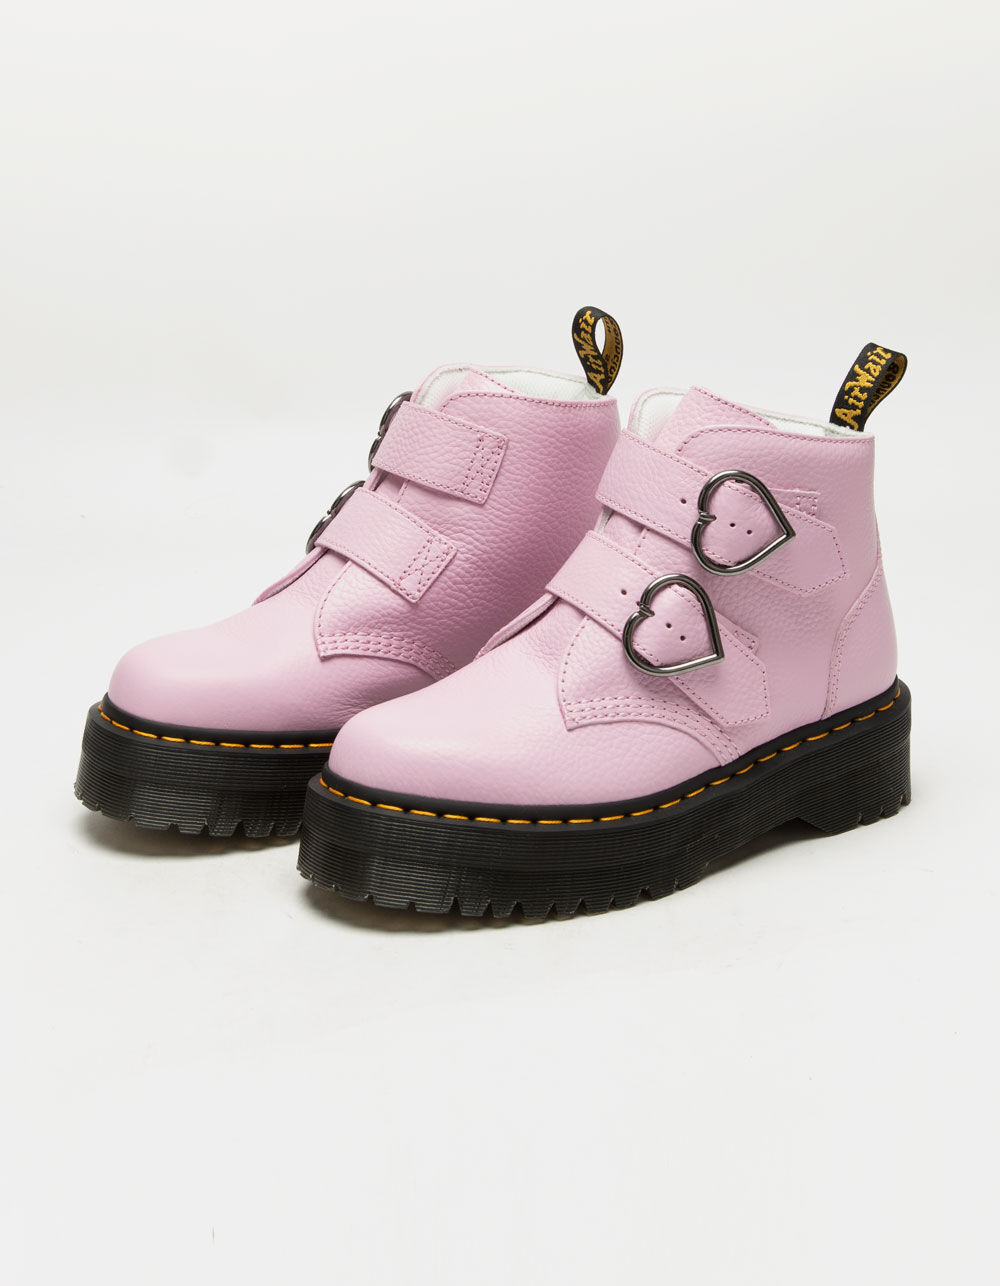 Dr. Martens Heart Bag Pink Ladies Accessories Used Excellent